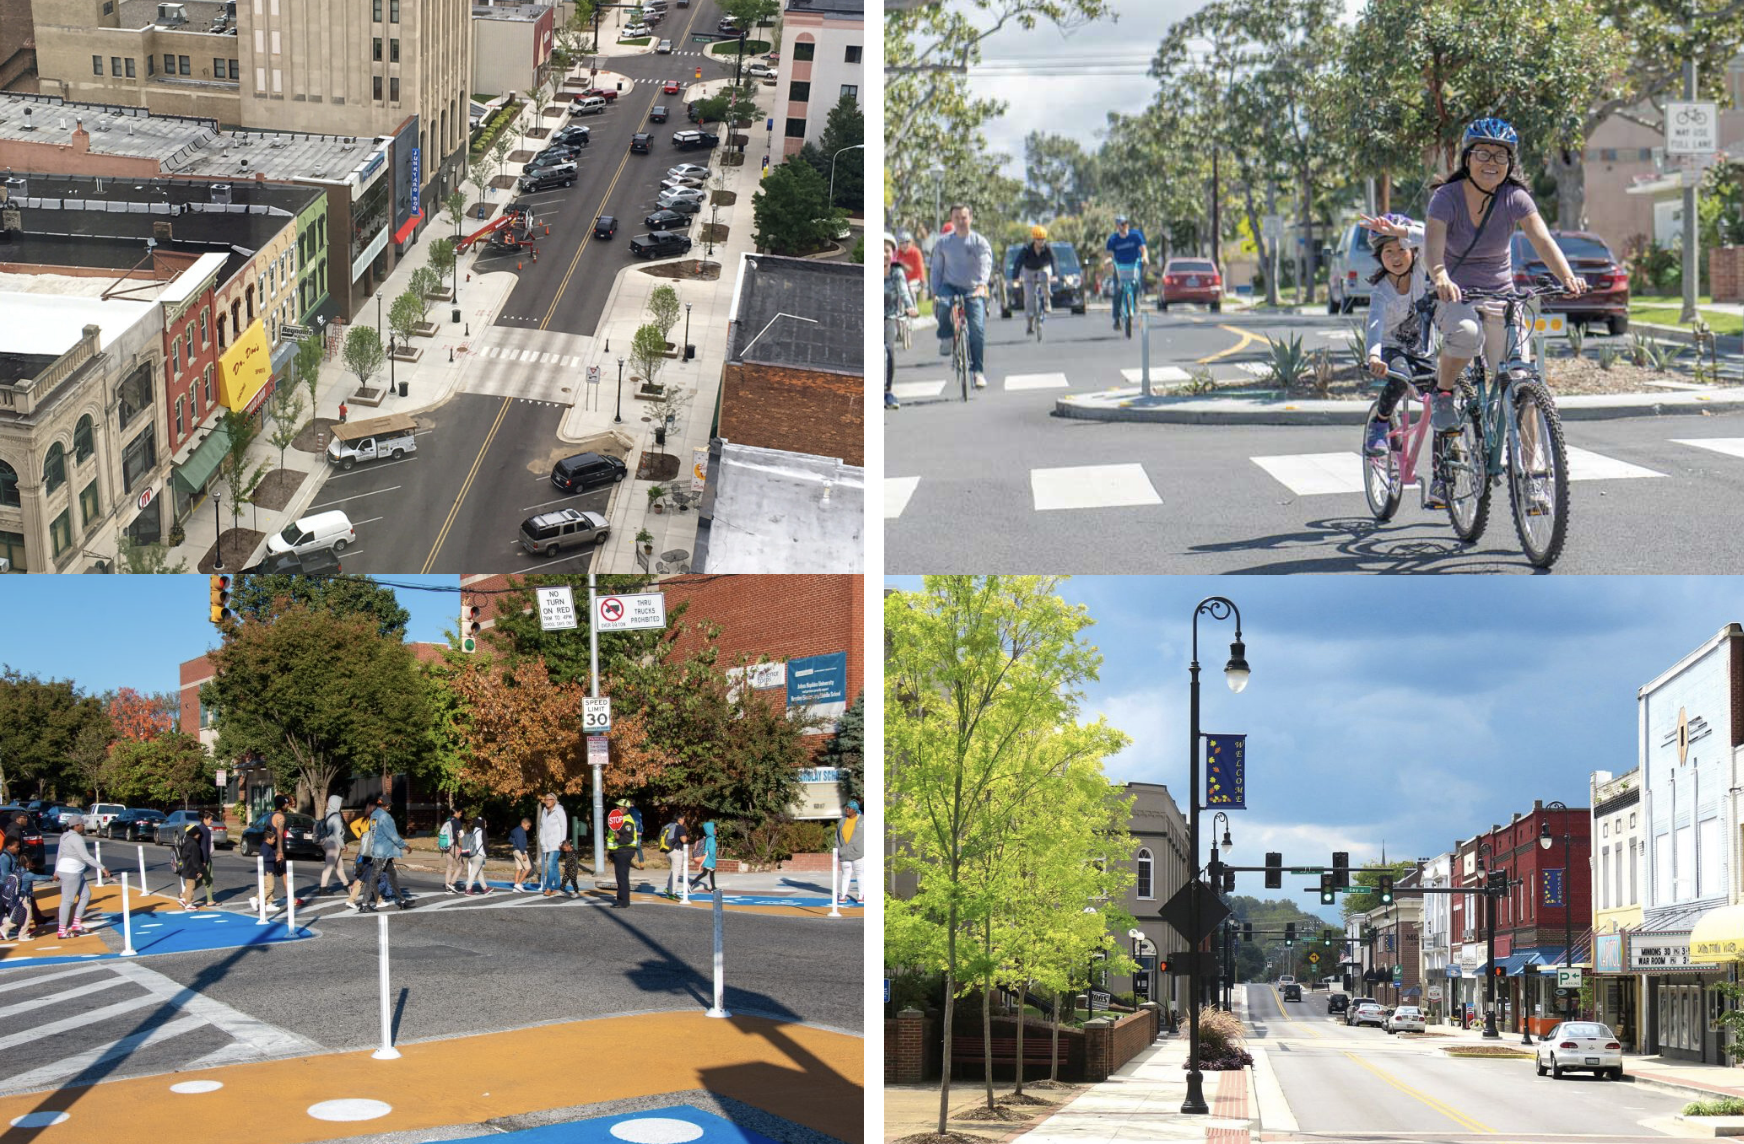 Complete Streets is a growing movement to provide safe transportation facilities for all users, regardless of mode.